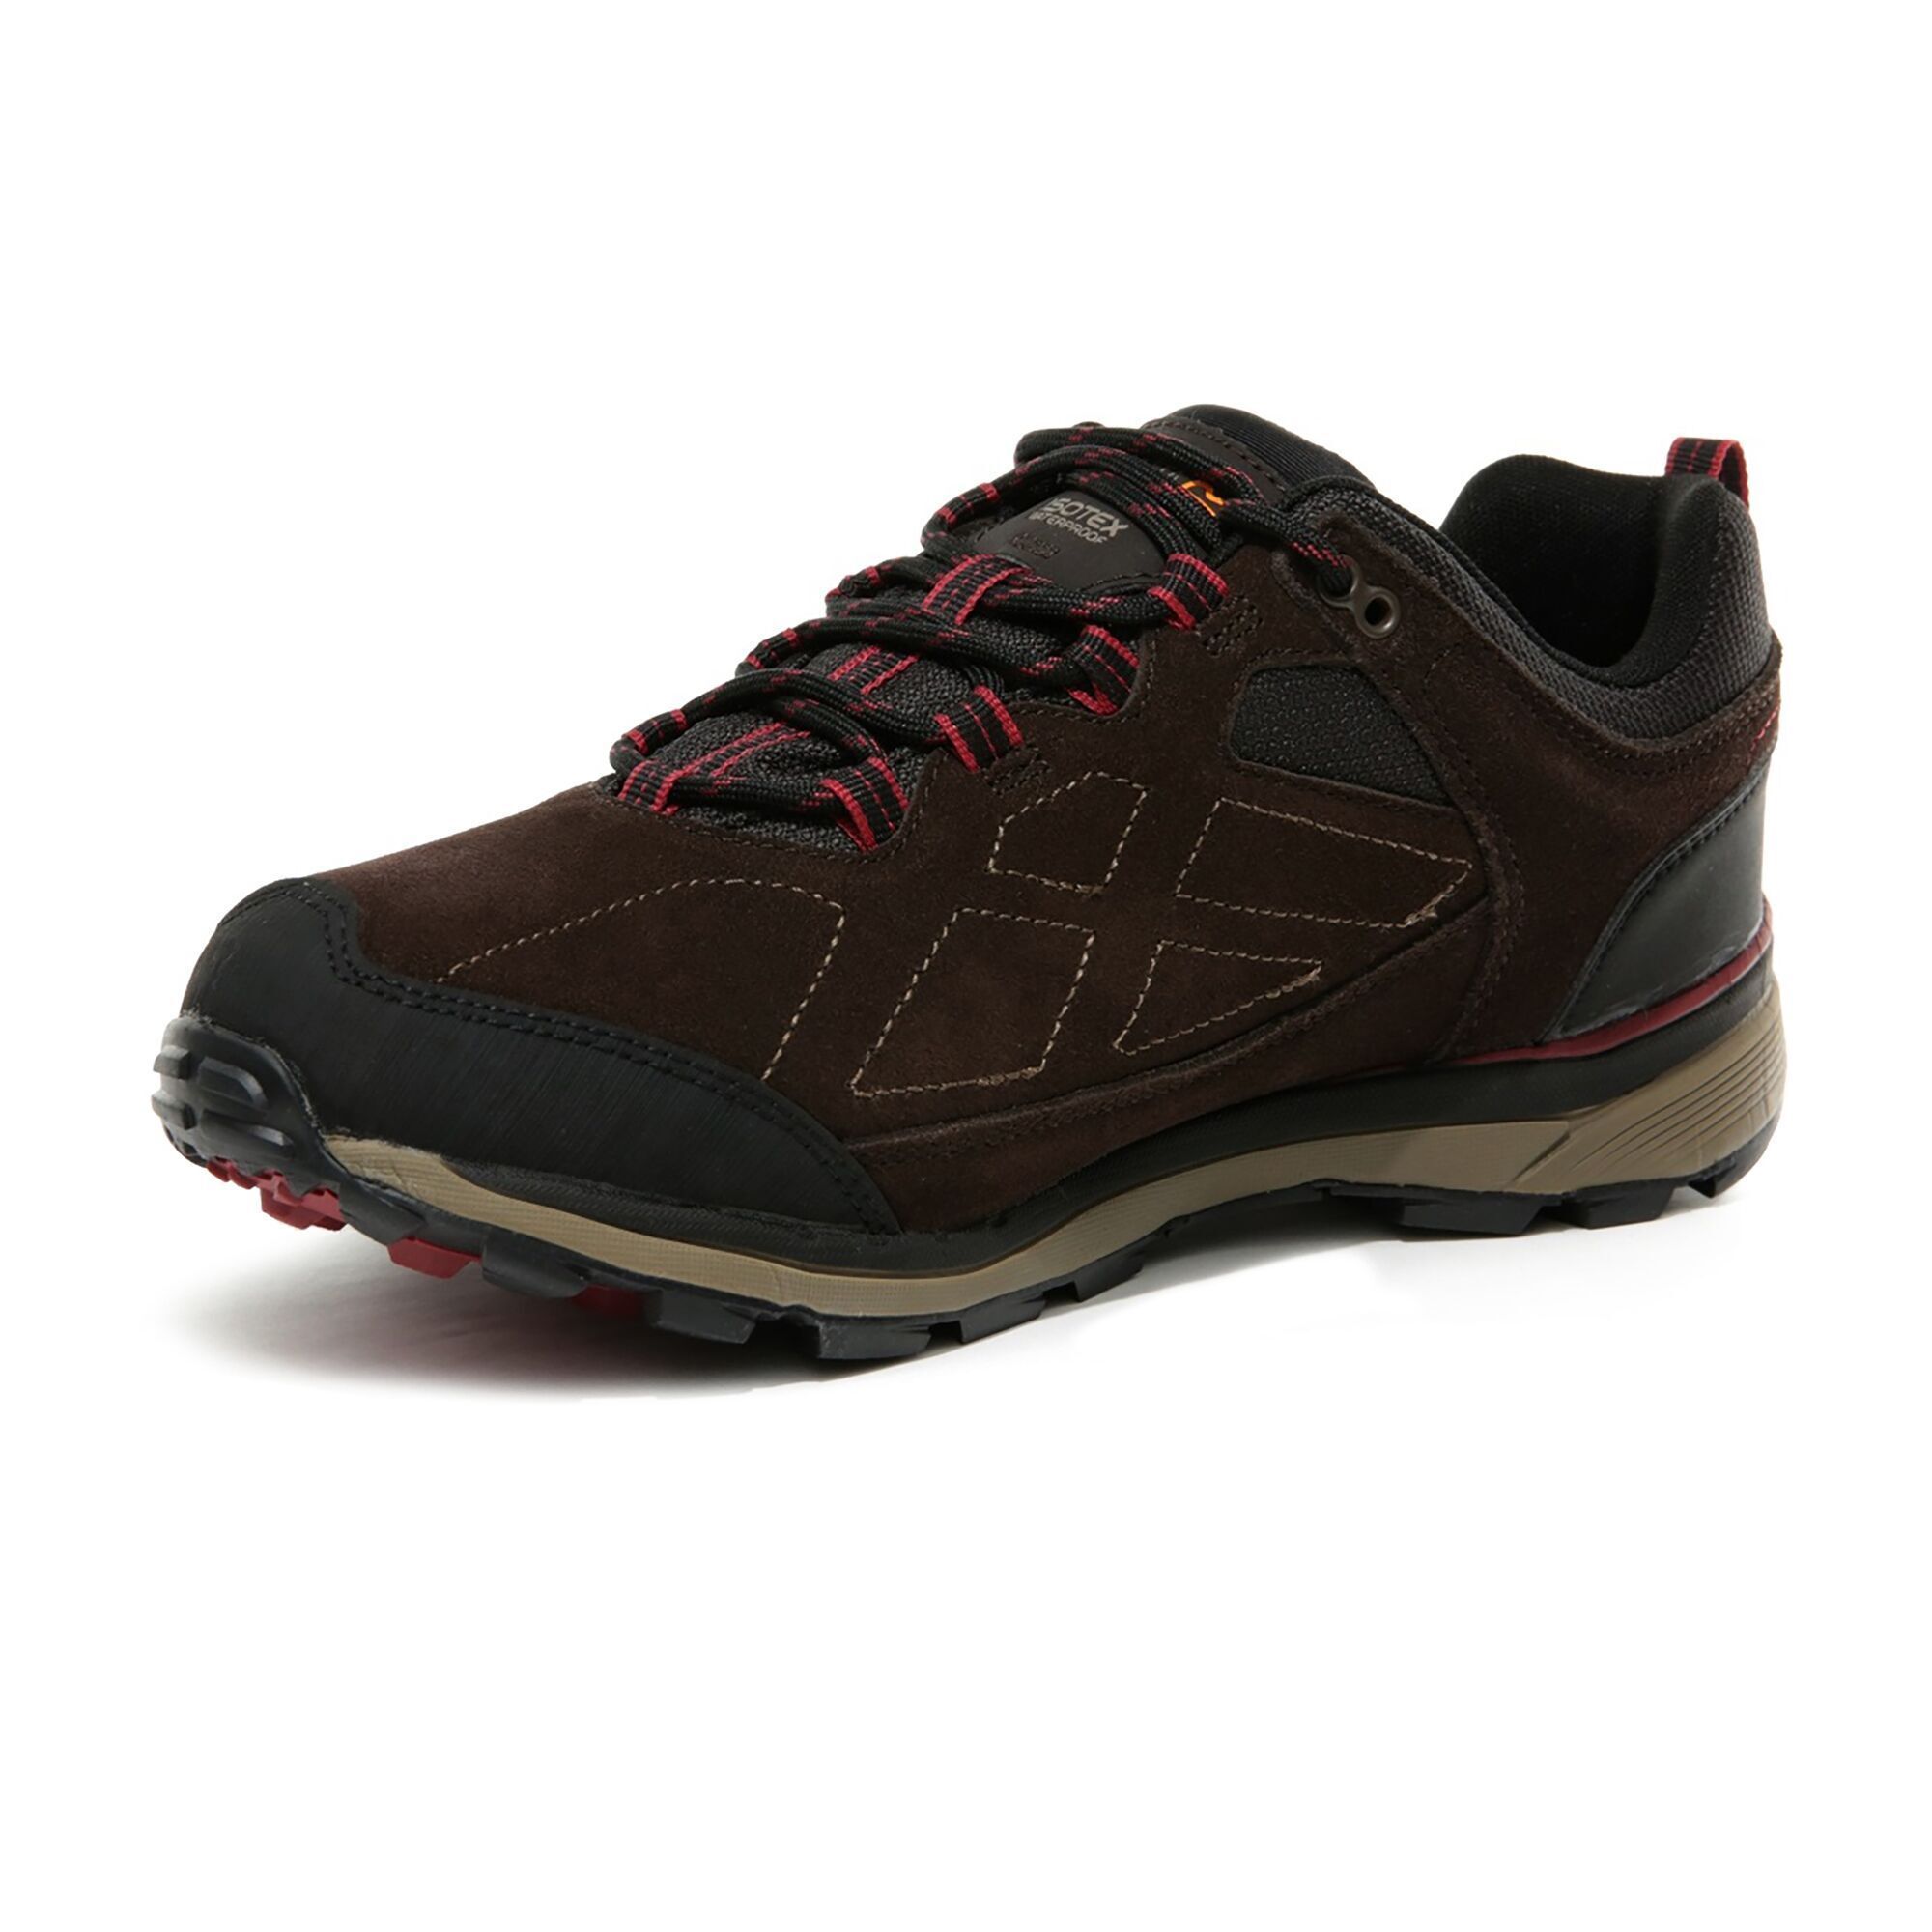 70% Leather (Textile), 10% Polyurathane, 10% Polyester, 10% Rubber. Waterproof, windproof and breathable Isotex. Hydropel water repellency. Ventilated mesh upper for breathability. Lightweight moulded EVA midsole for cushioning. Abrasion mesh collar.